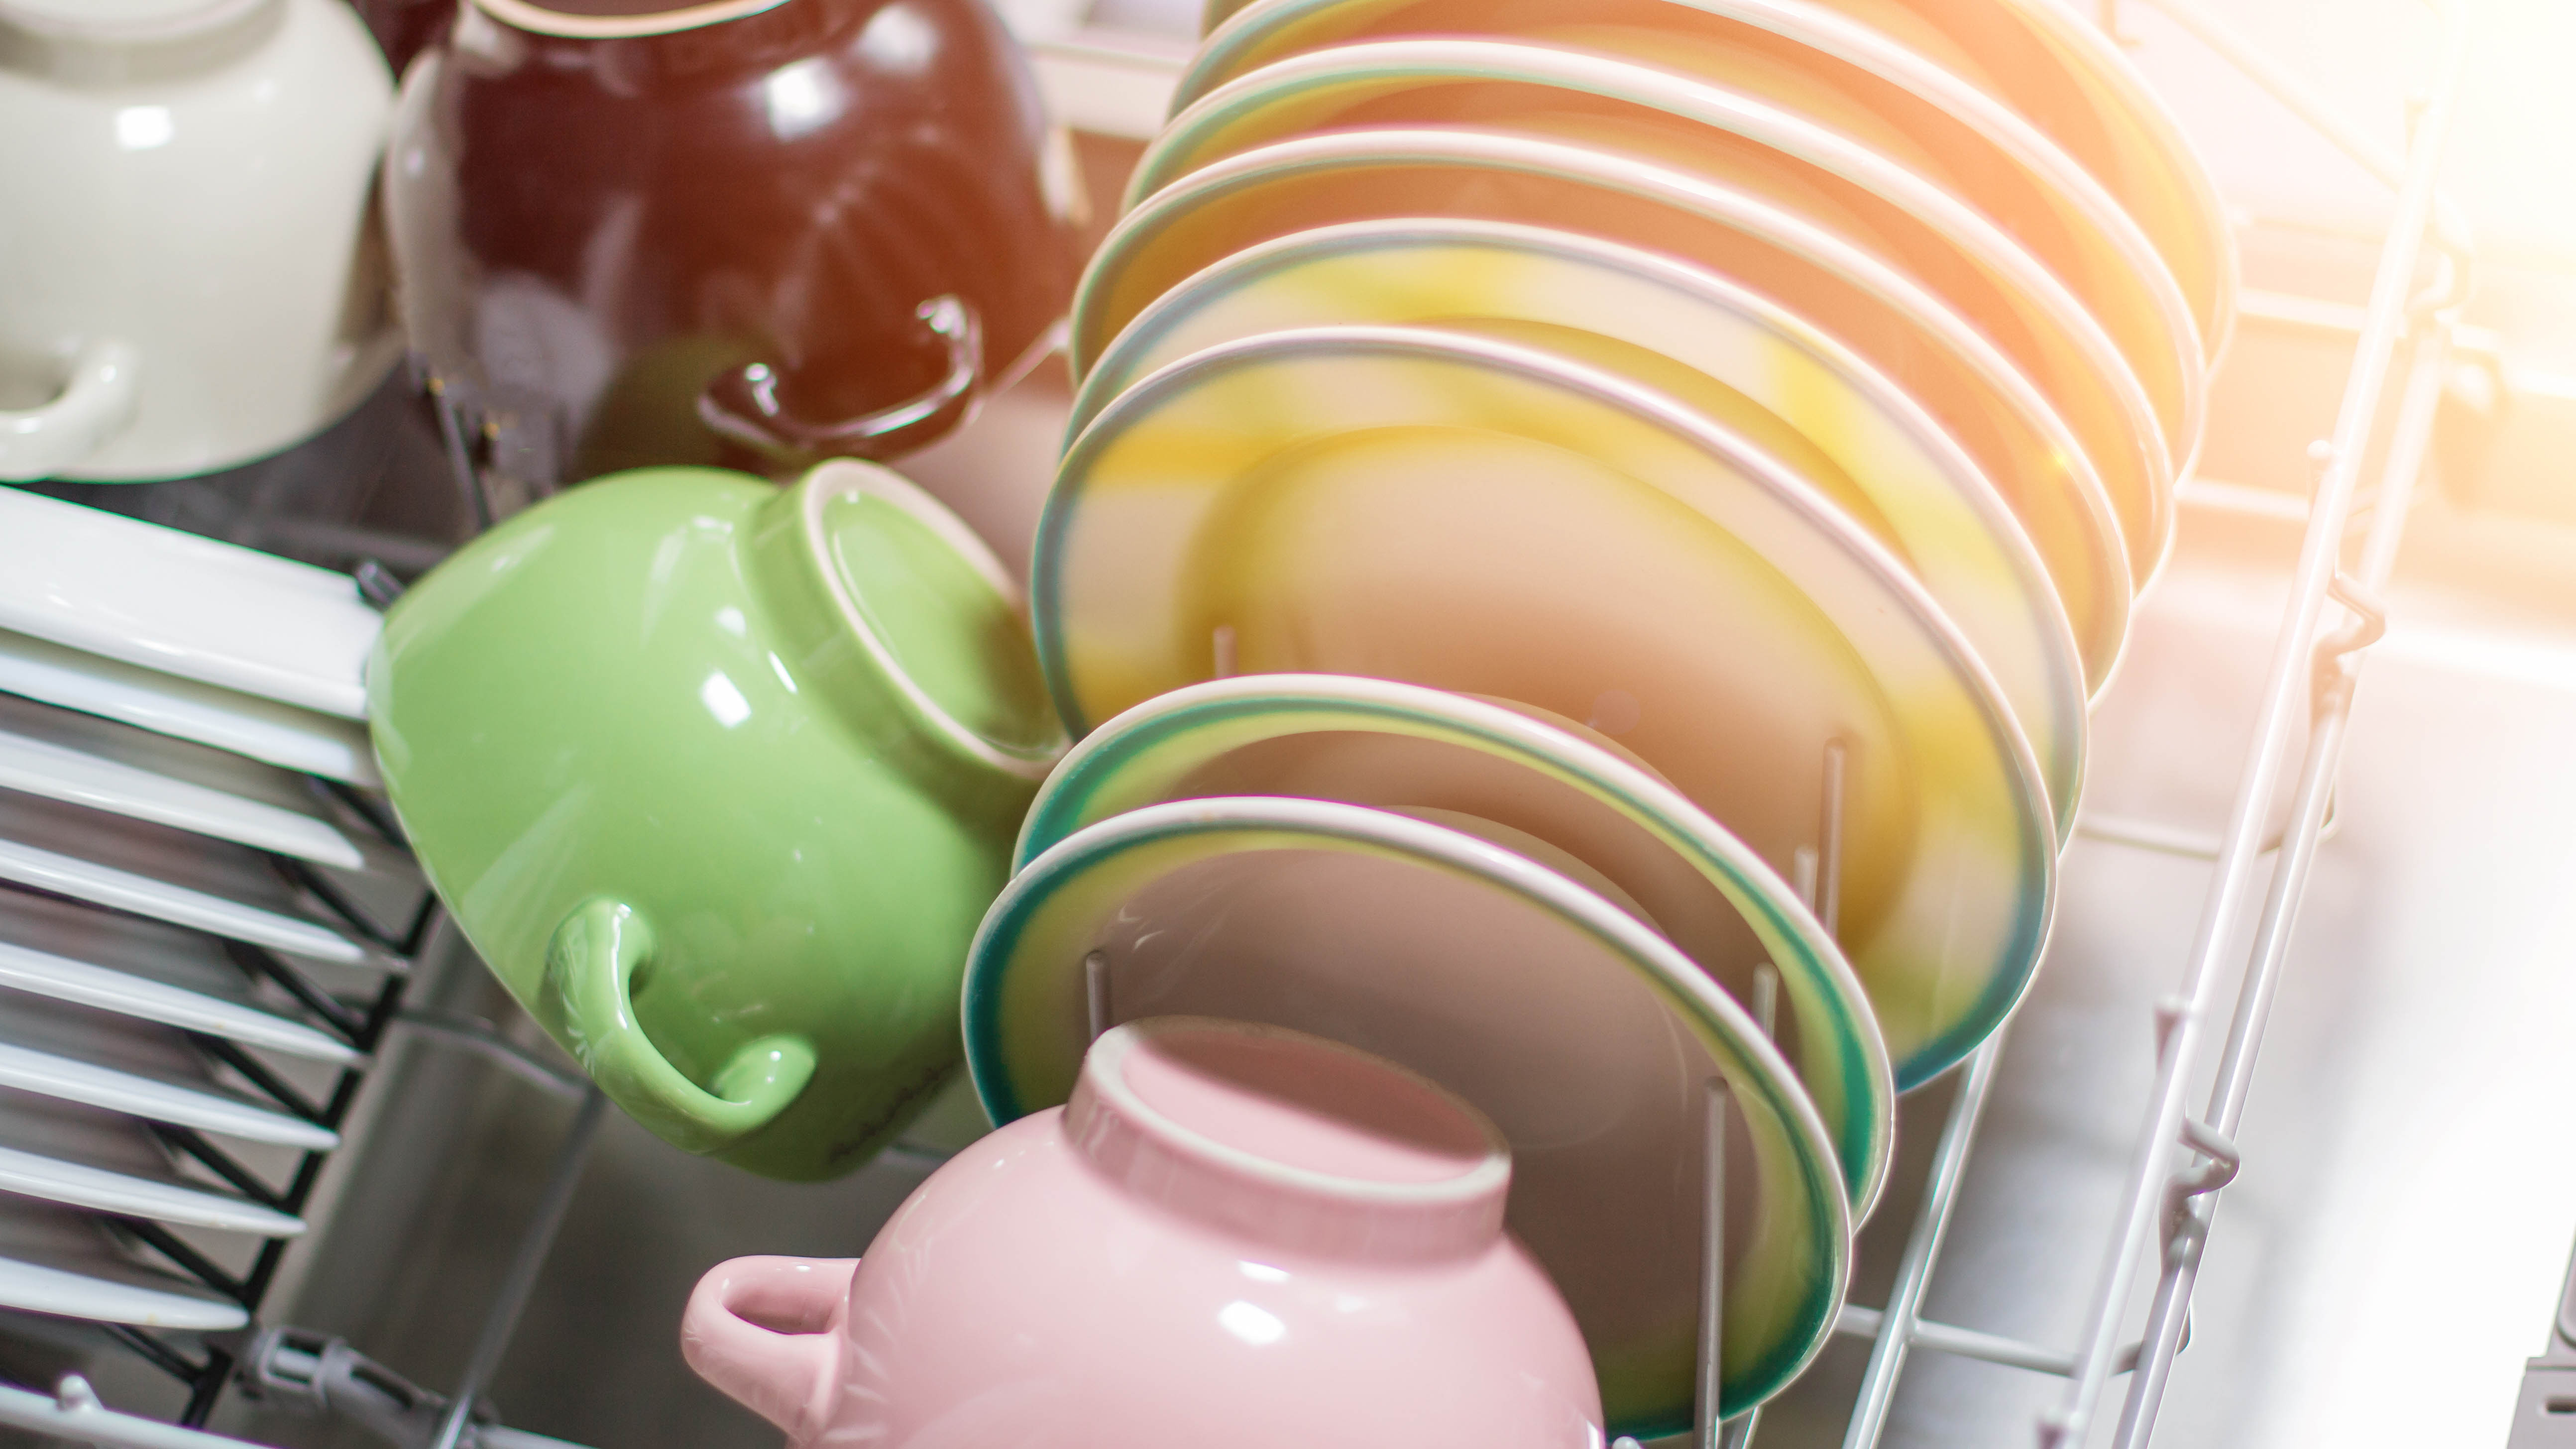 A dishwasher filled with colorful plates and bowls